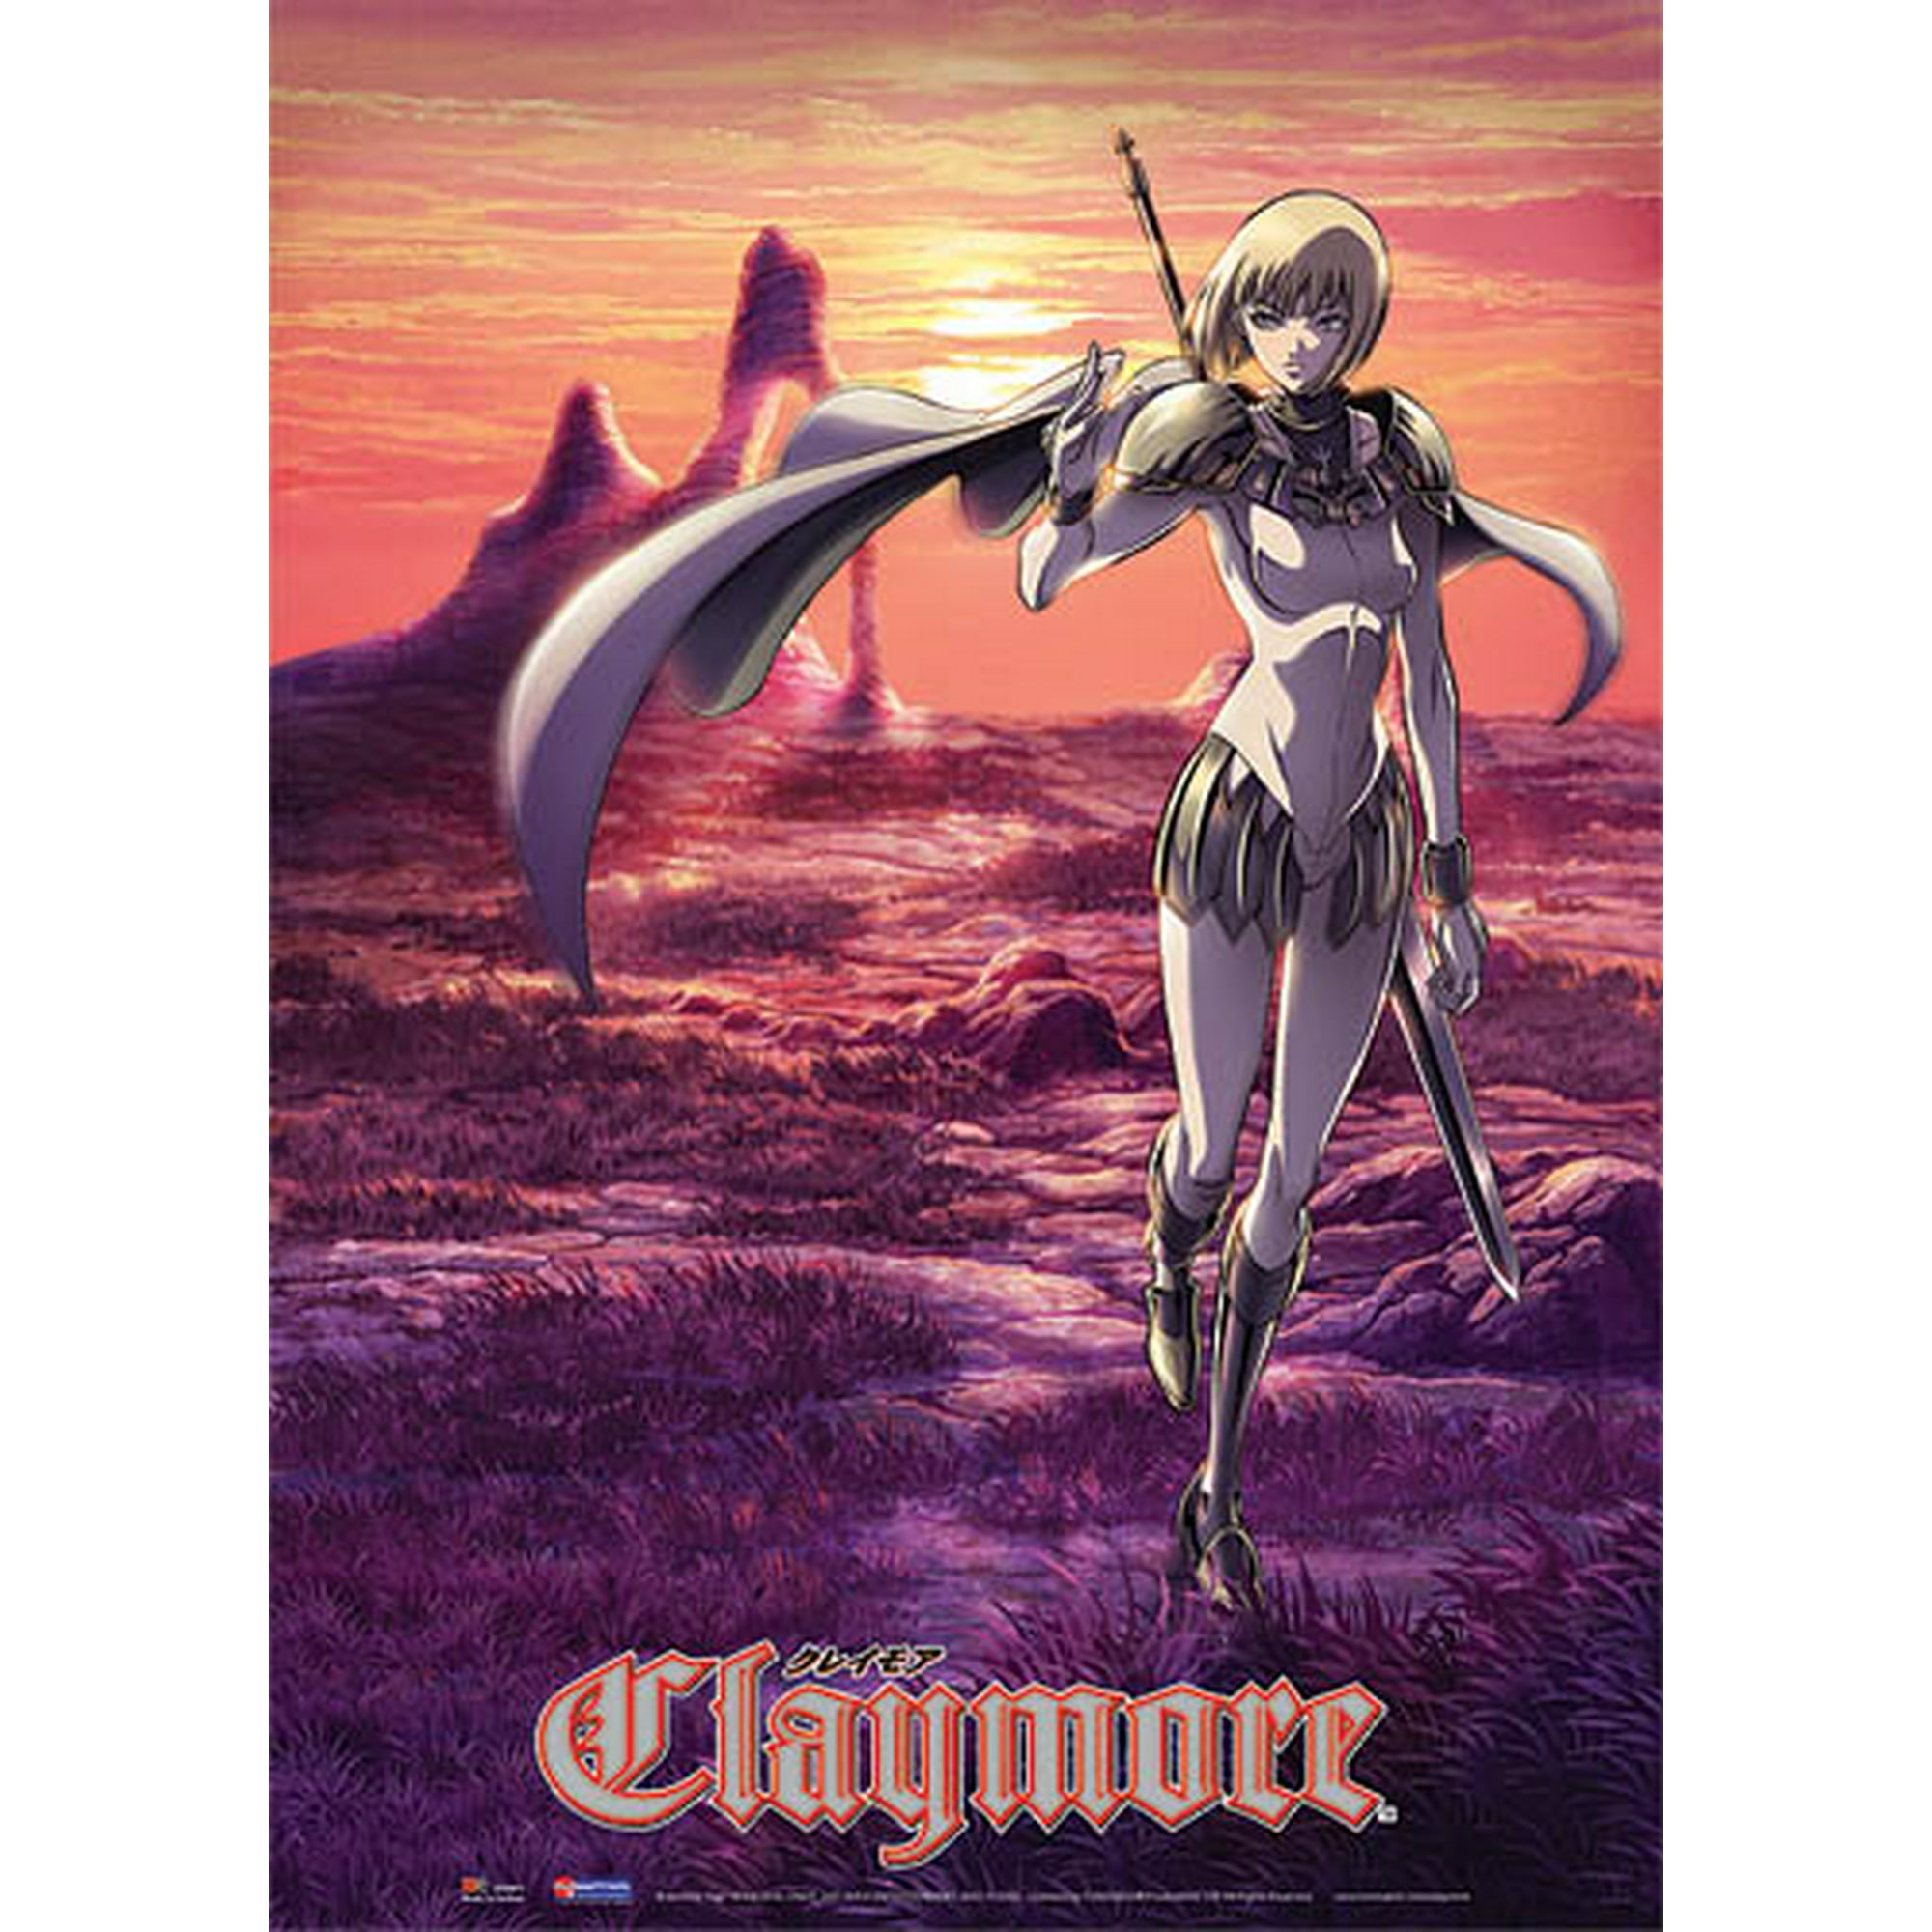 Wall Scroll - Claymore - New Clare Landscape Scenery Anime Gifts Toys Art  ge9901 | Walmart Canada